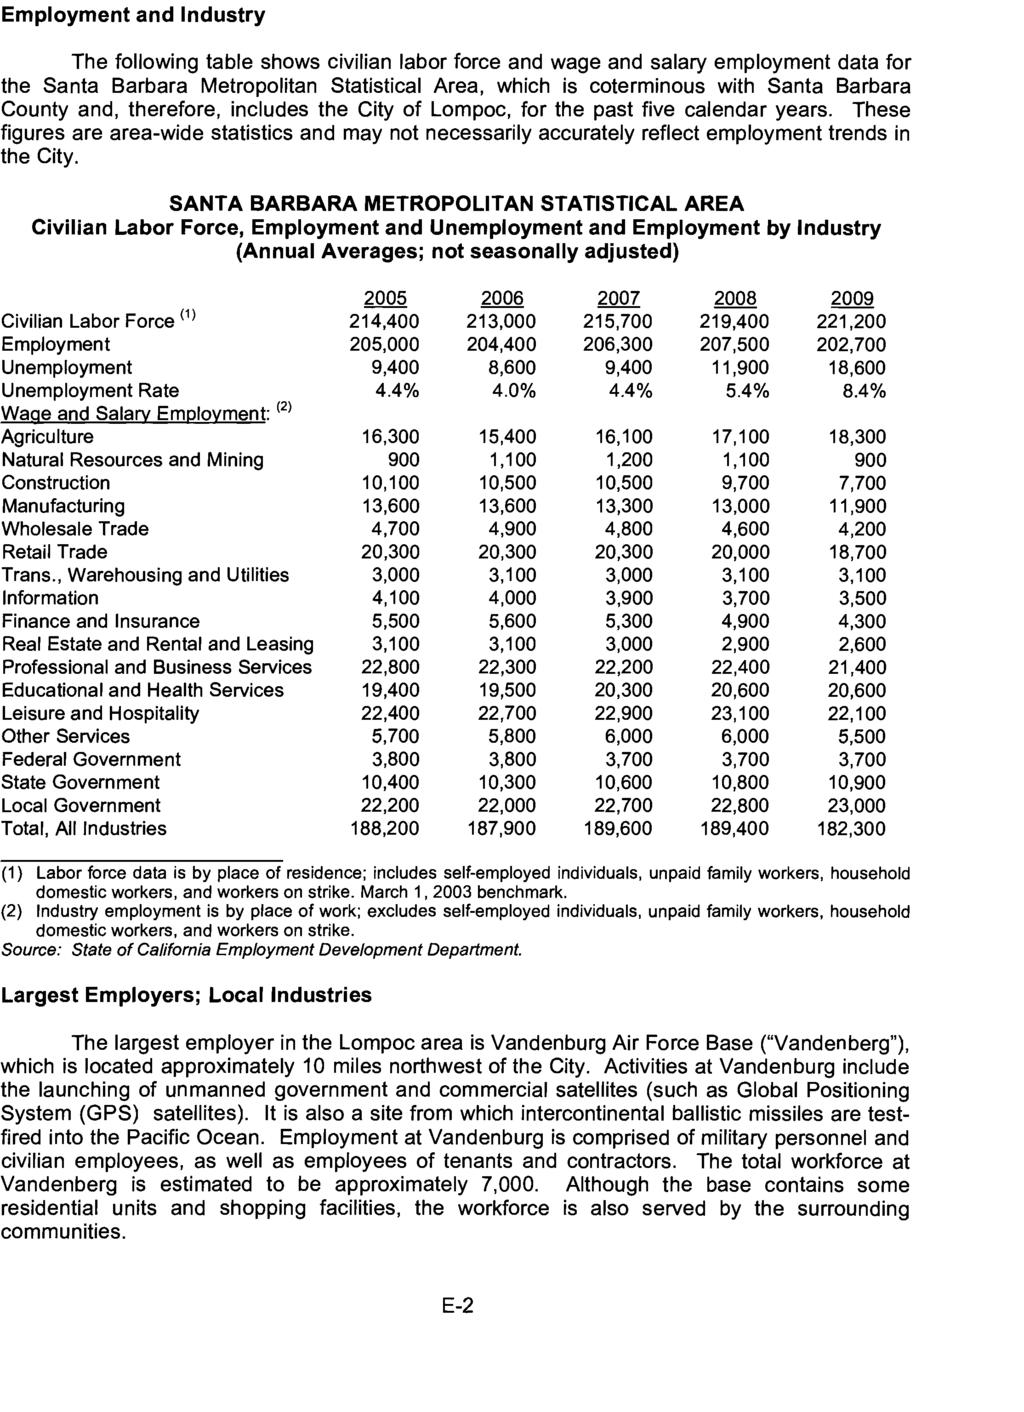 Employment and Industry The following table shows civilian labor force and wage and salary employment data for the Santa Barbara Metropolitan Statistical Area, which is coterminous with Santa Barbara